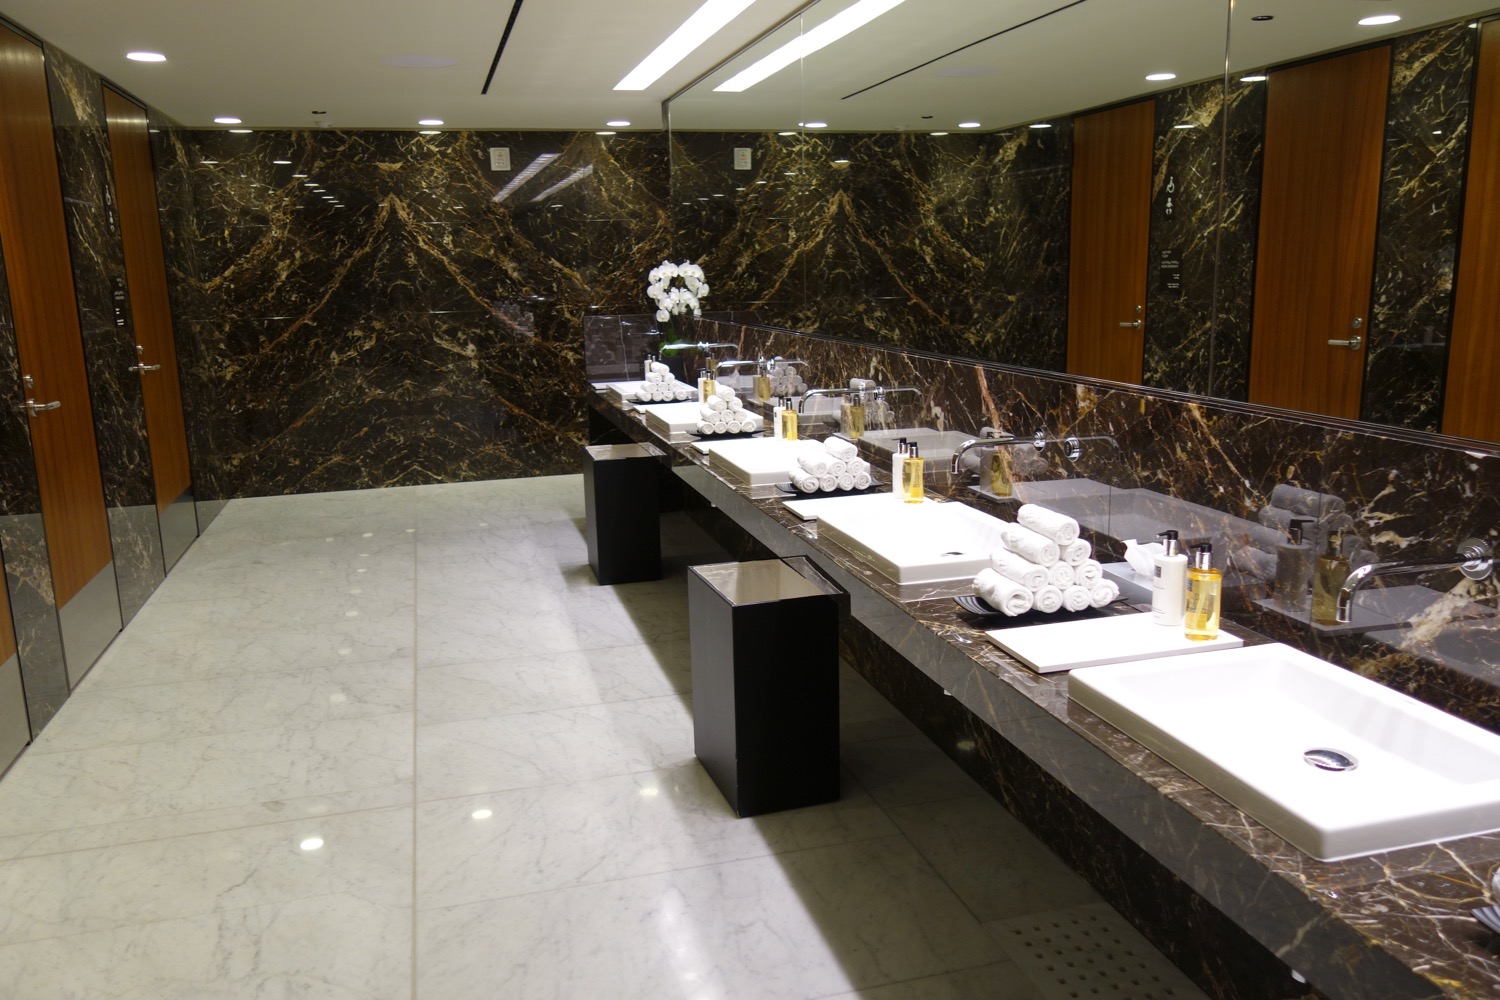 a bathroom with marble walls and sinks